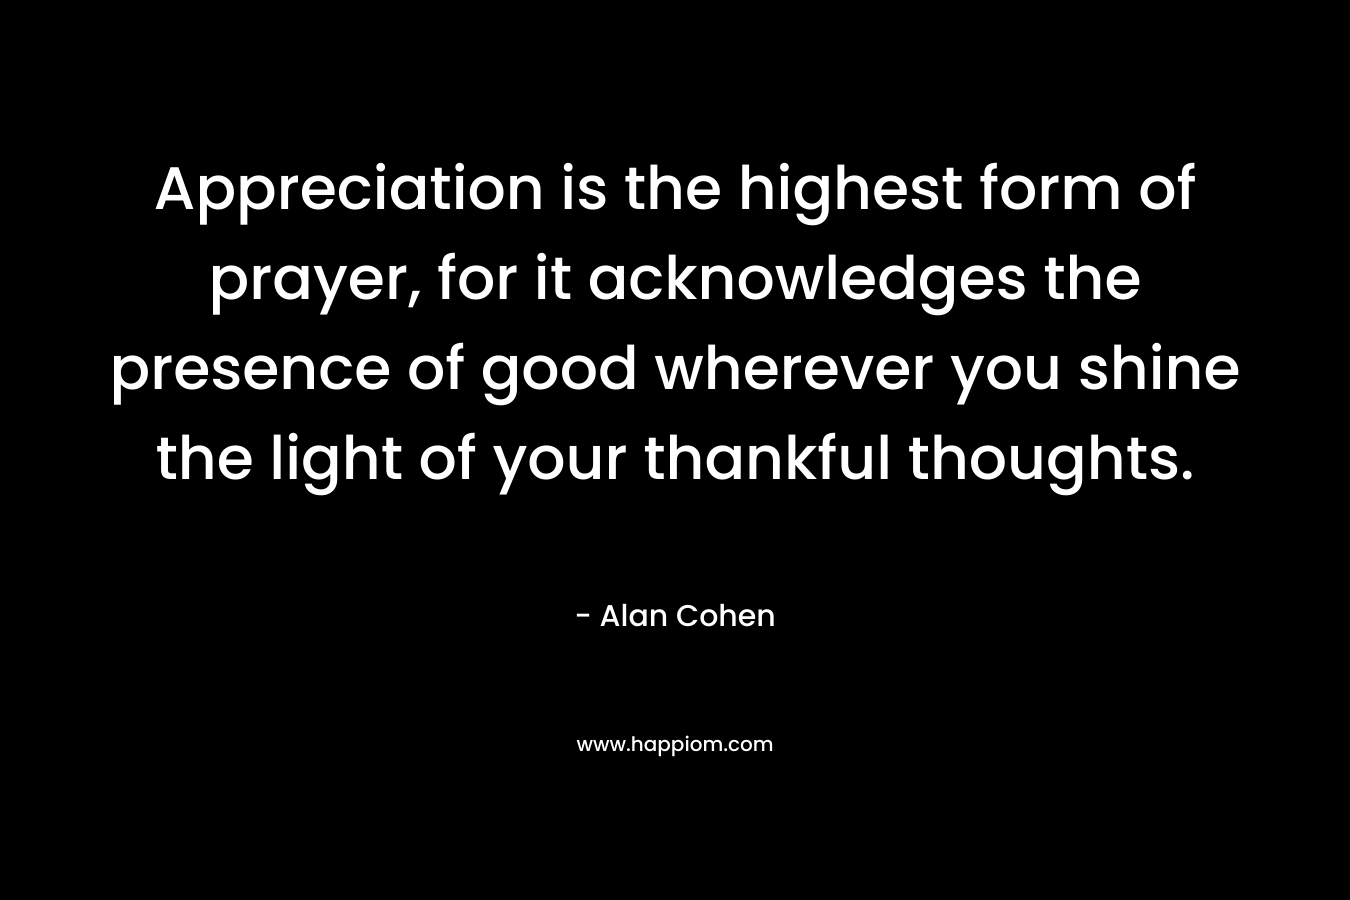 Appreciation is the highest form of prayer, for it acknowledges the presence of good wherever you shine the light of your thankful thoughts.